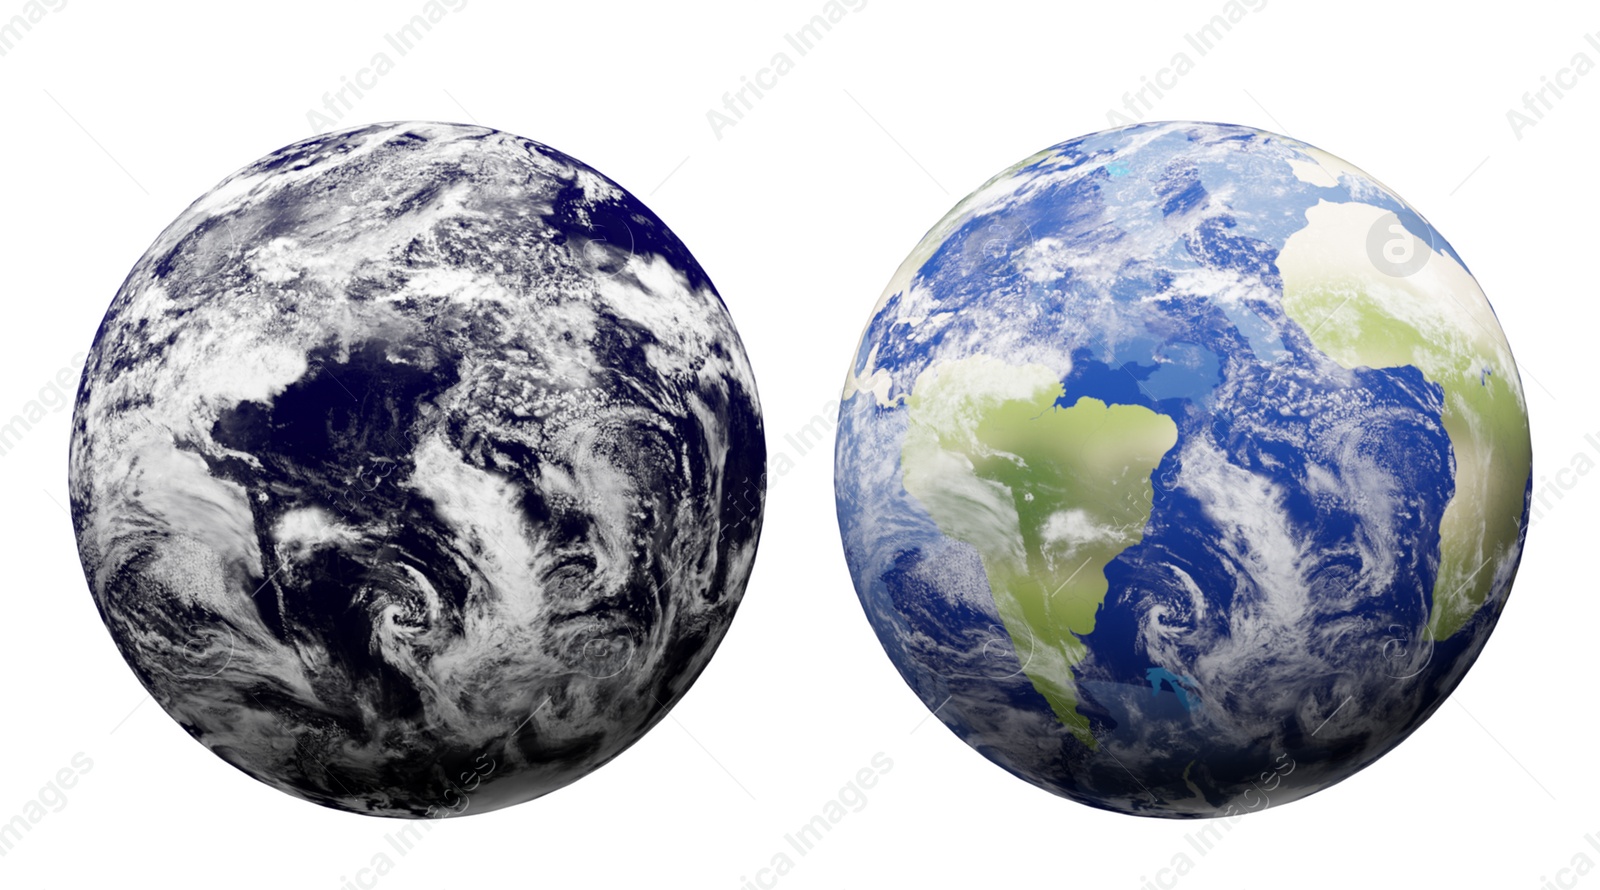 Illustration of Illustrations of planet Earth on white background, collage